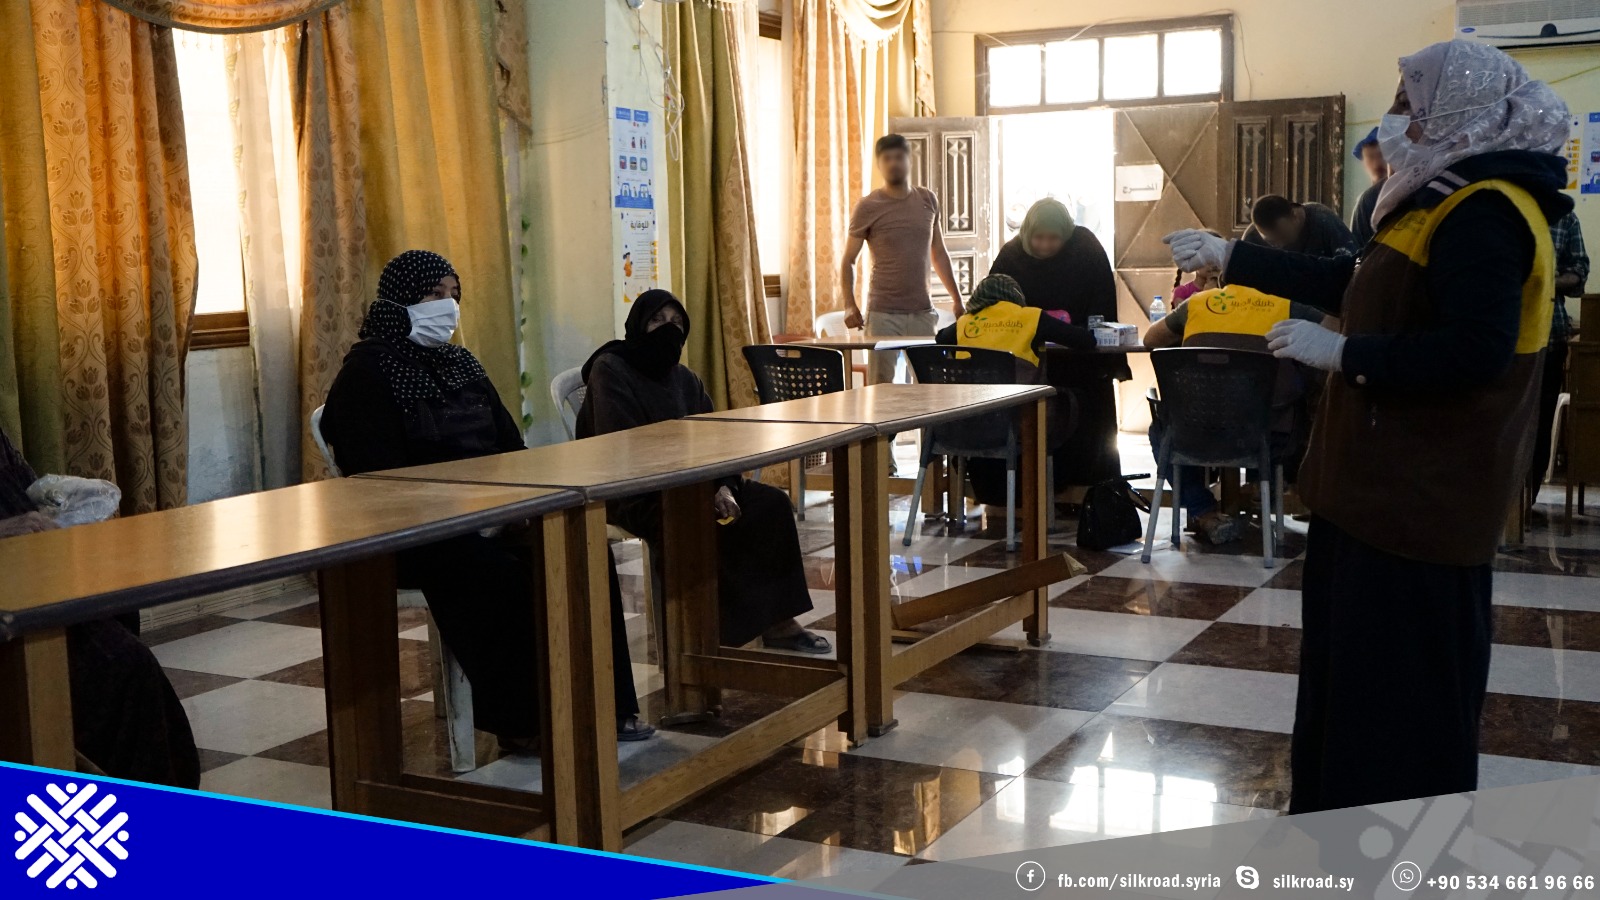 The distribution of personal hygiene materials and protective masks is accompanied by a specialized team conducting health awareness sessions for the beneficiaries, with the aim of spreading correct health information and increasing the awareness of indiv